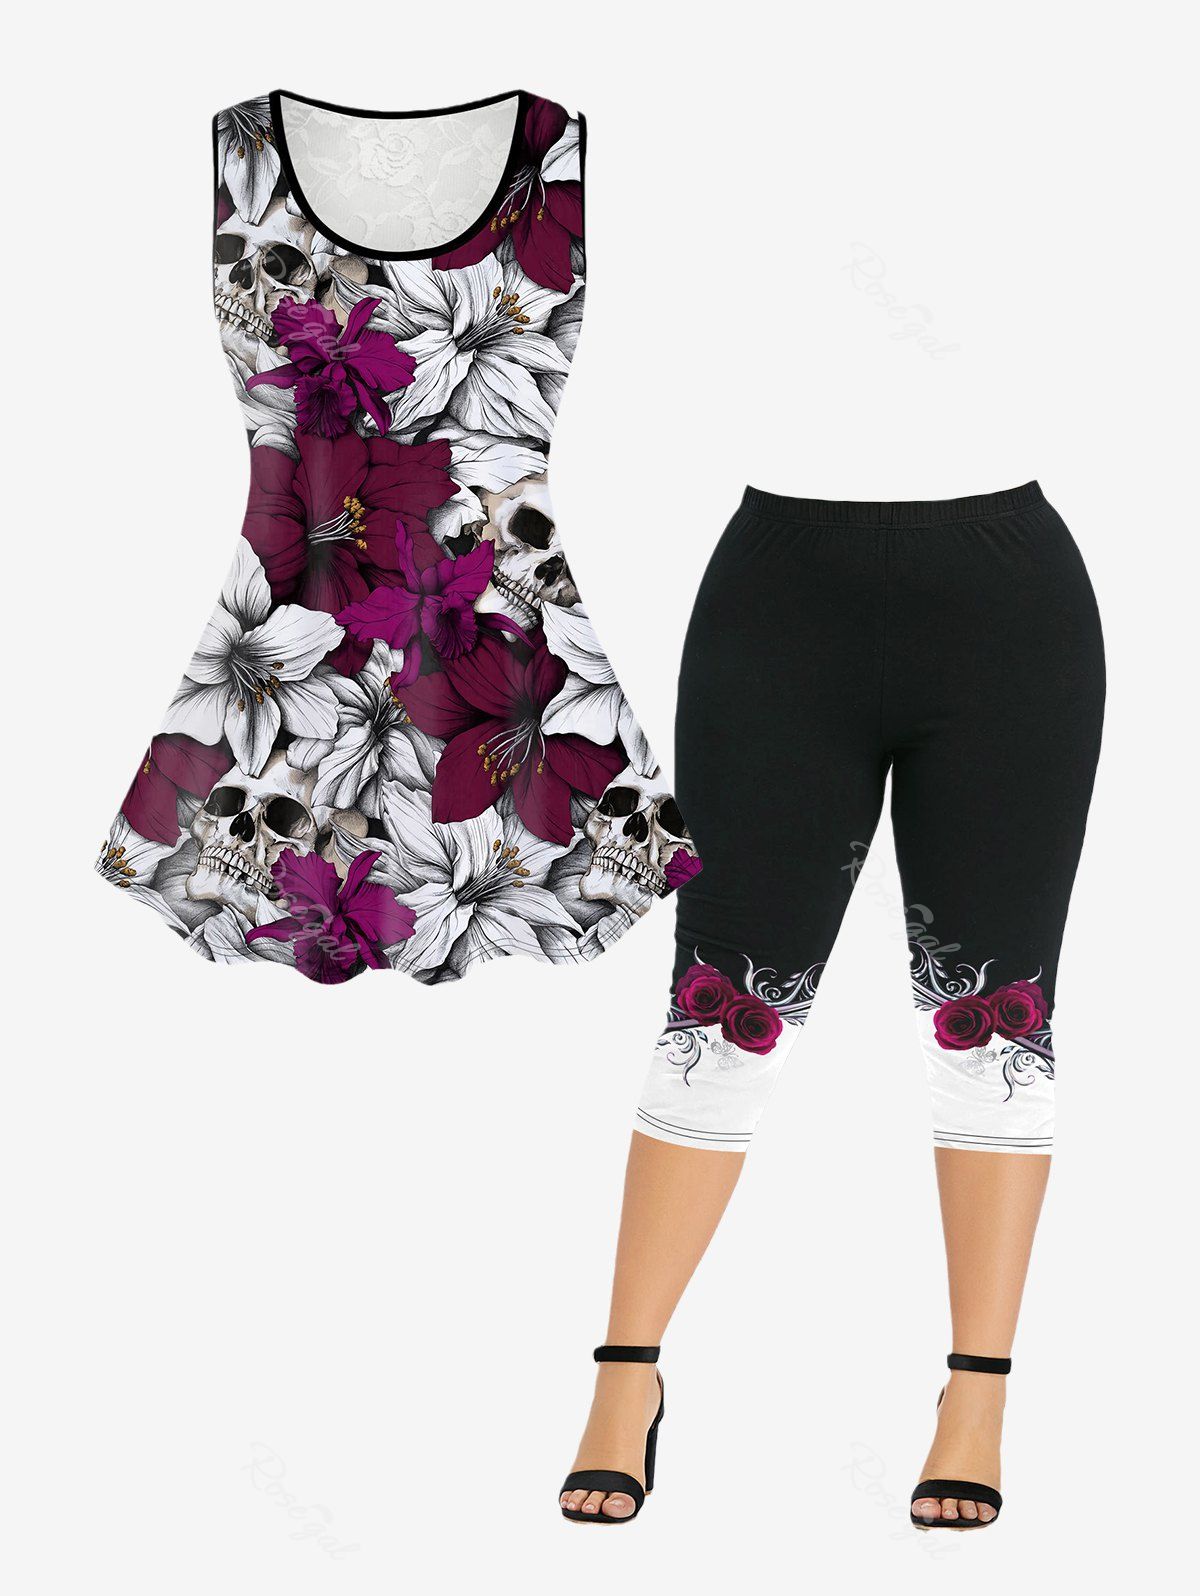 Best Gothic Flower Skull Print Lace Panel Sleeveless Top and Rose Butterfly Print Capri Leggings Outfit  